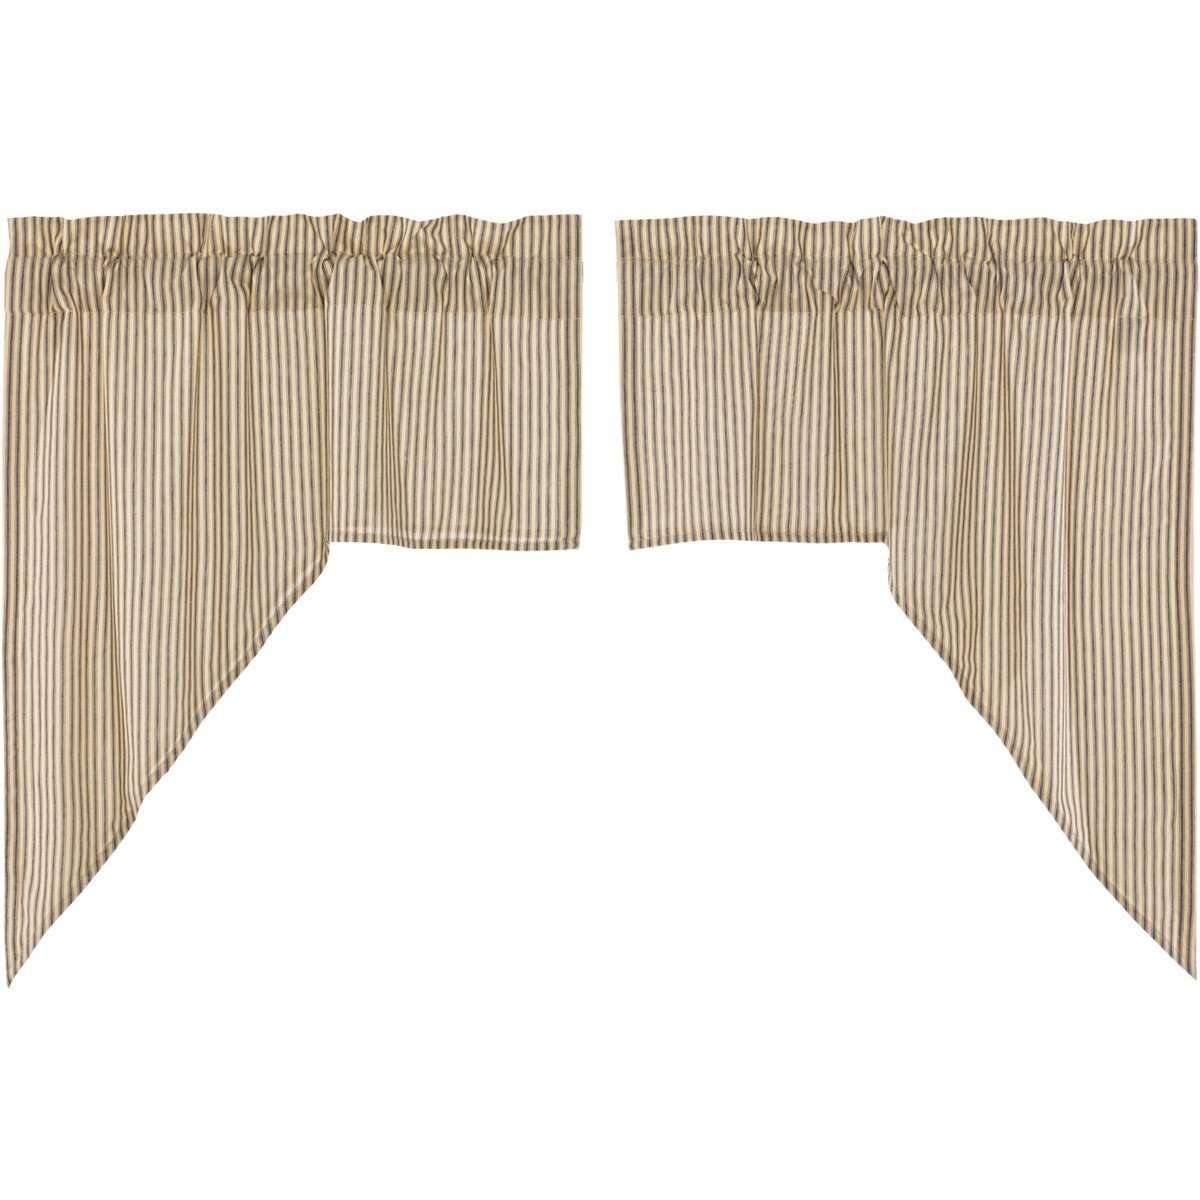 Sawyer Mill Charcoal Ticking Stripe Swag Curtain Set of 2 36x36x16 VHC Brands - The Fox Decor